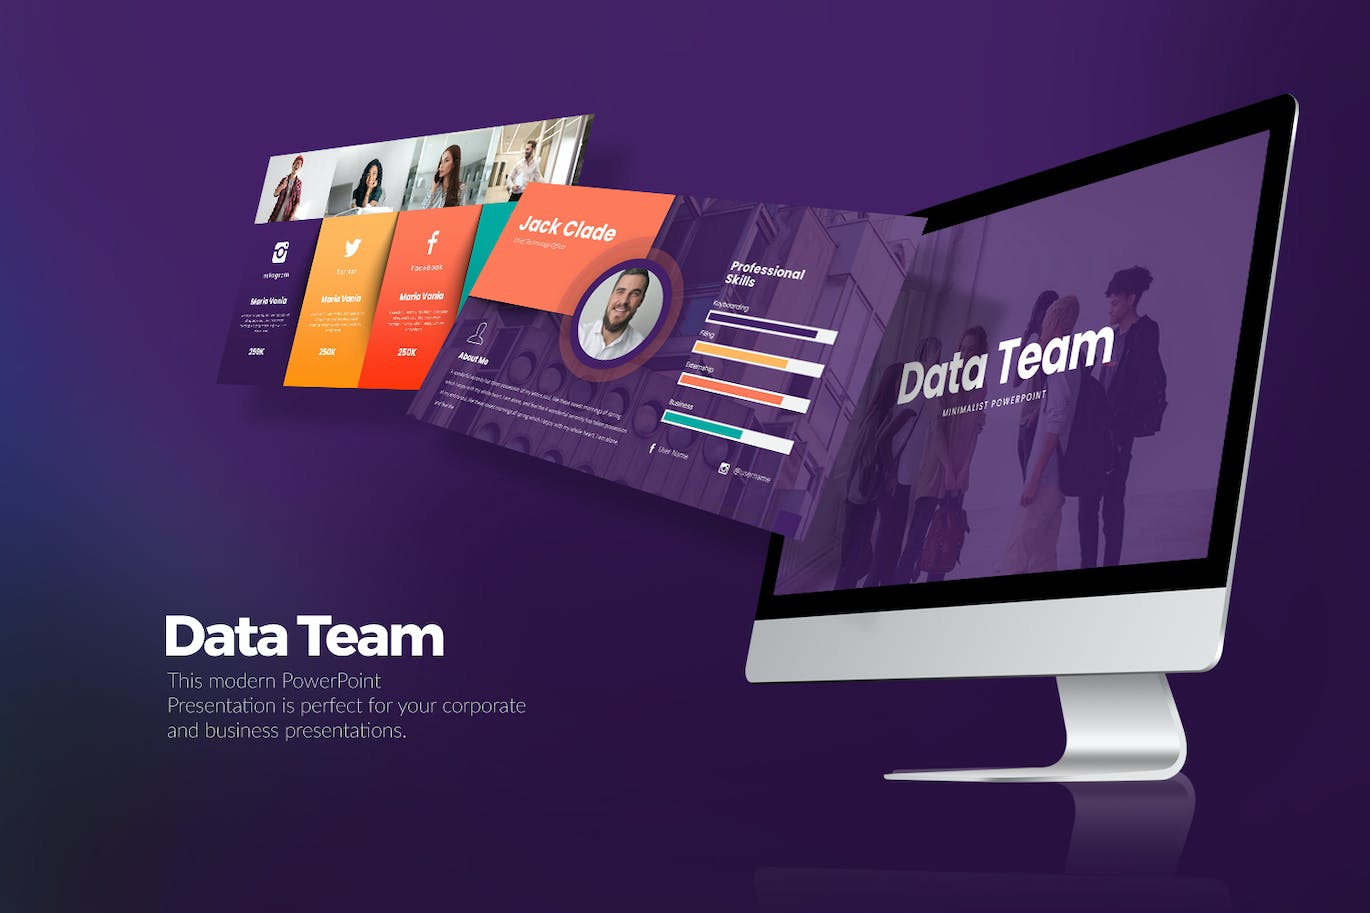 A collection of images of enchanting slides of the presentation template on the theme of the data team.